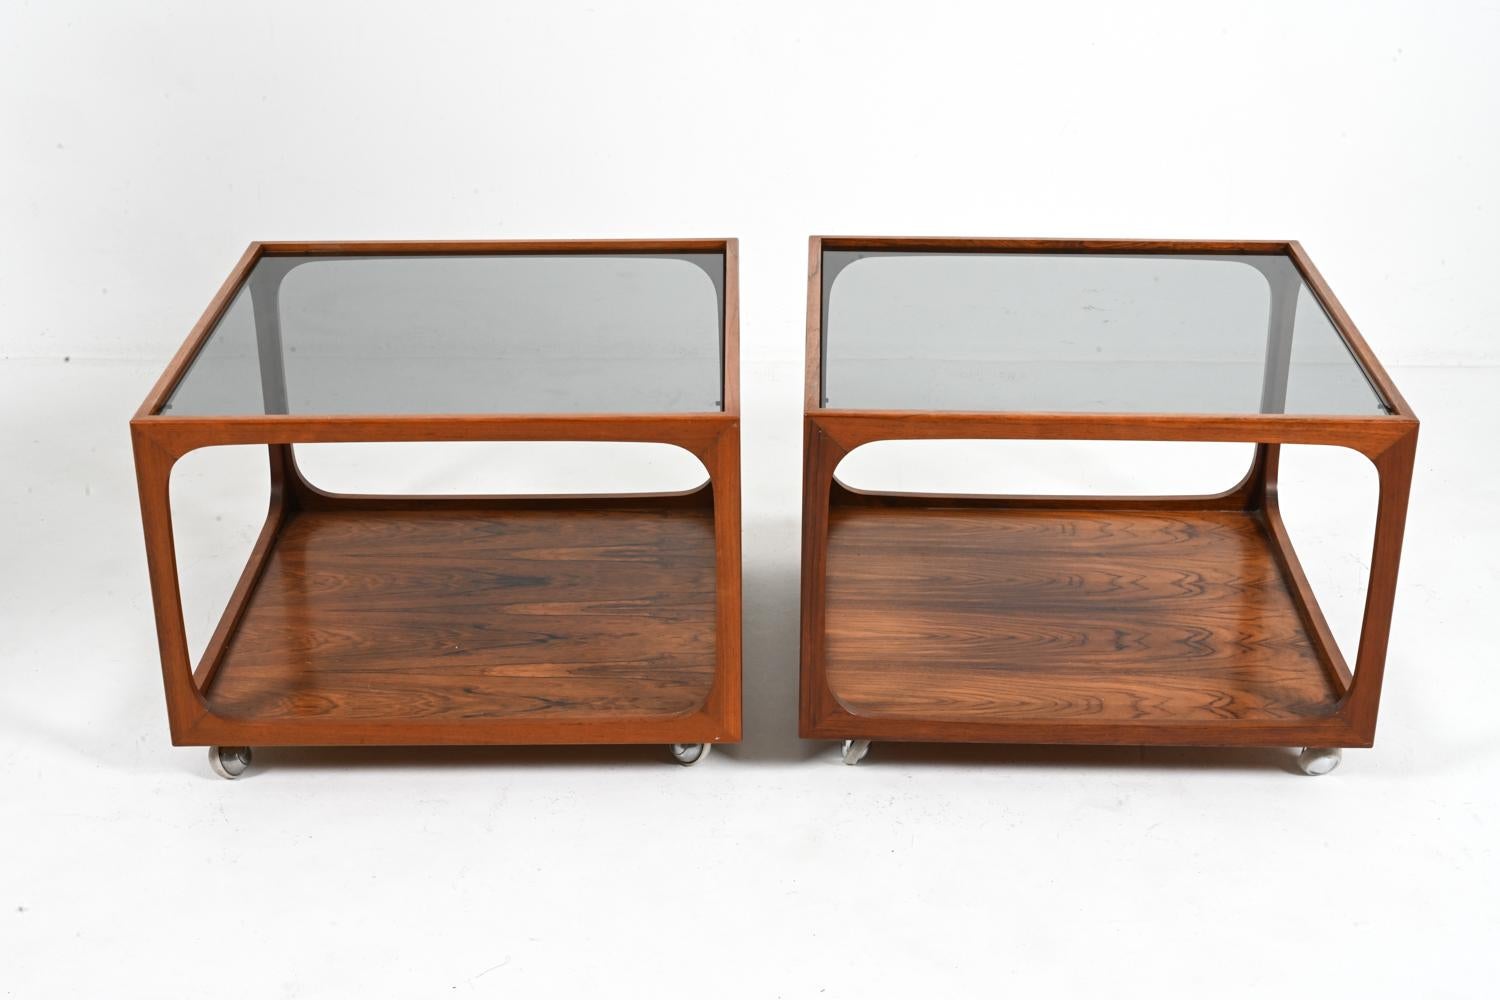 Rare Pair of Rosewood & Smoked Glass Cube End Tables Attributed to Wilhelm Renz For Sale 3